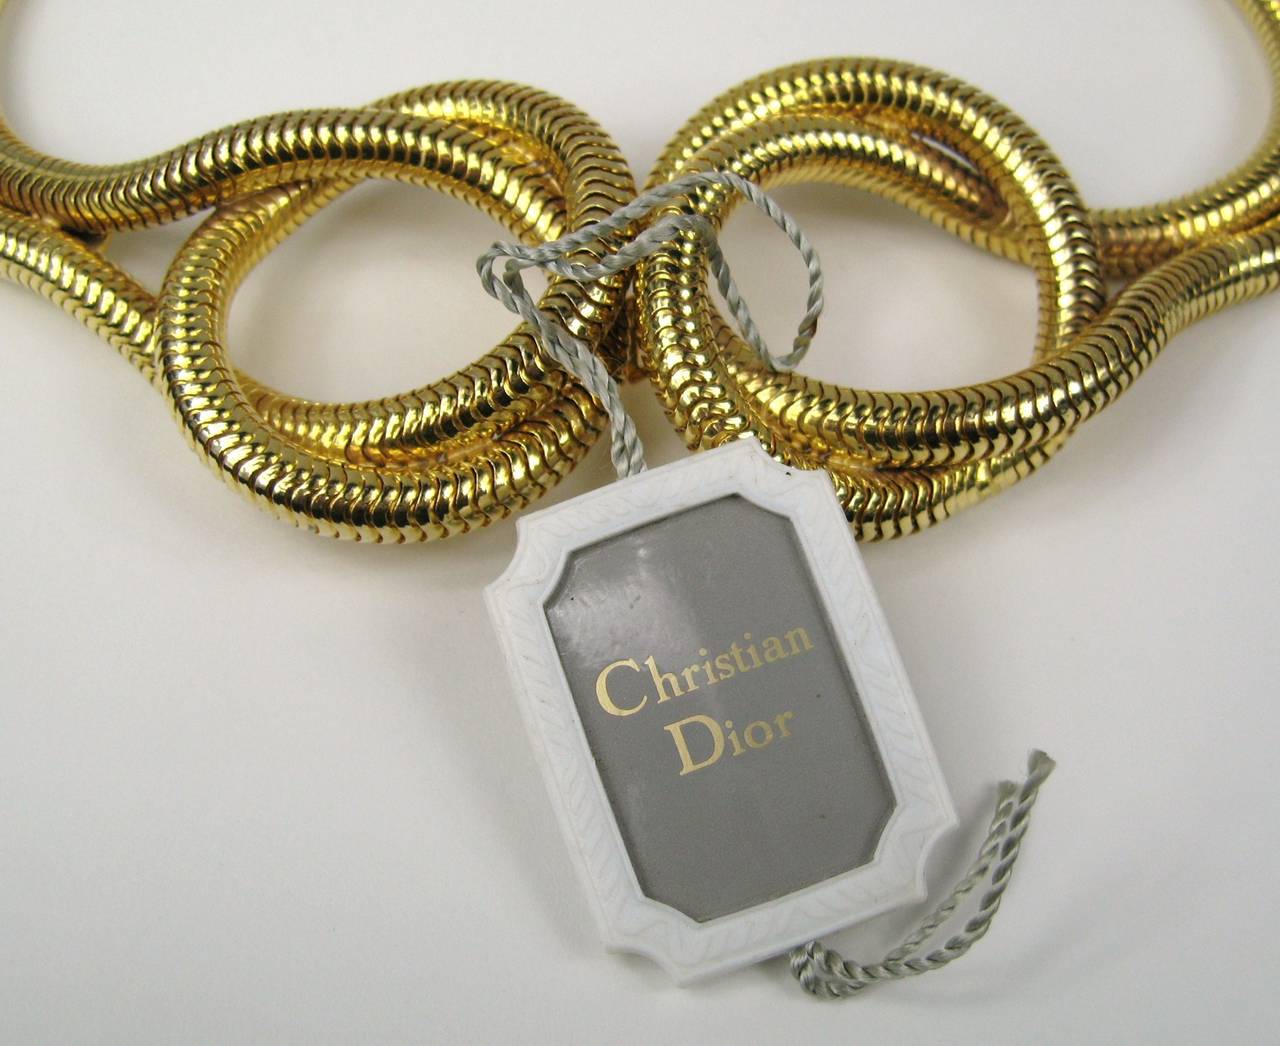 New Old stock Christian Dior Belt
Clips closed in the front

30